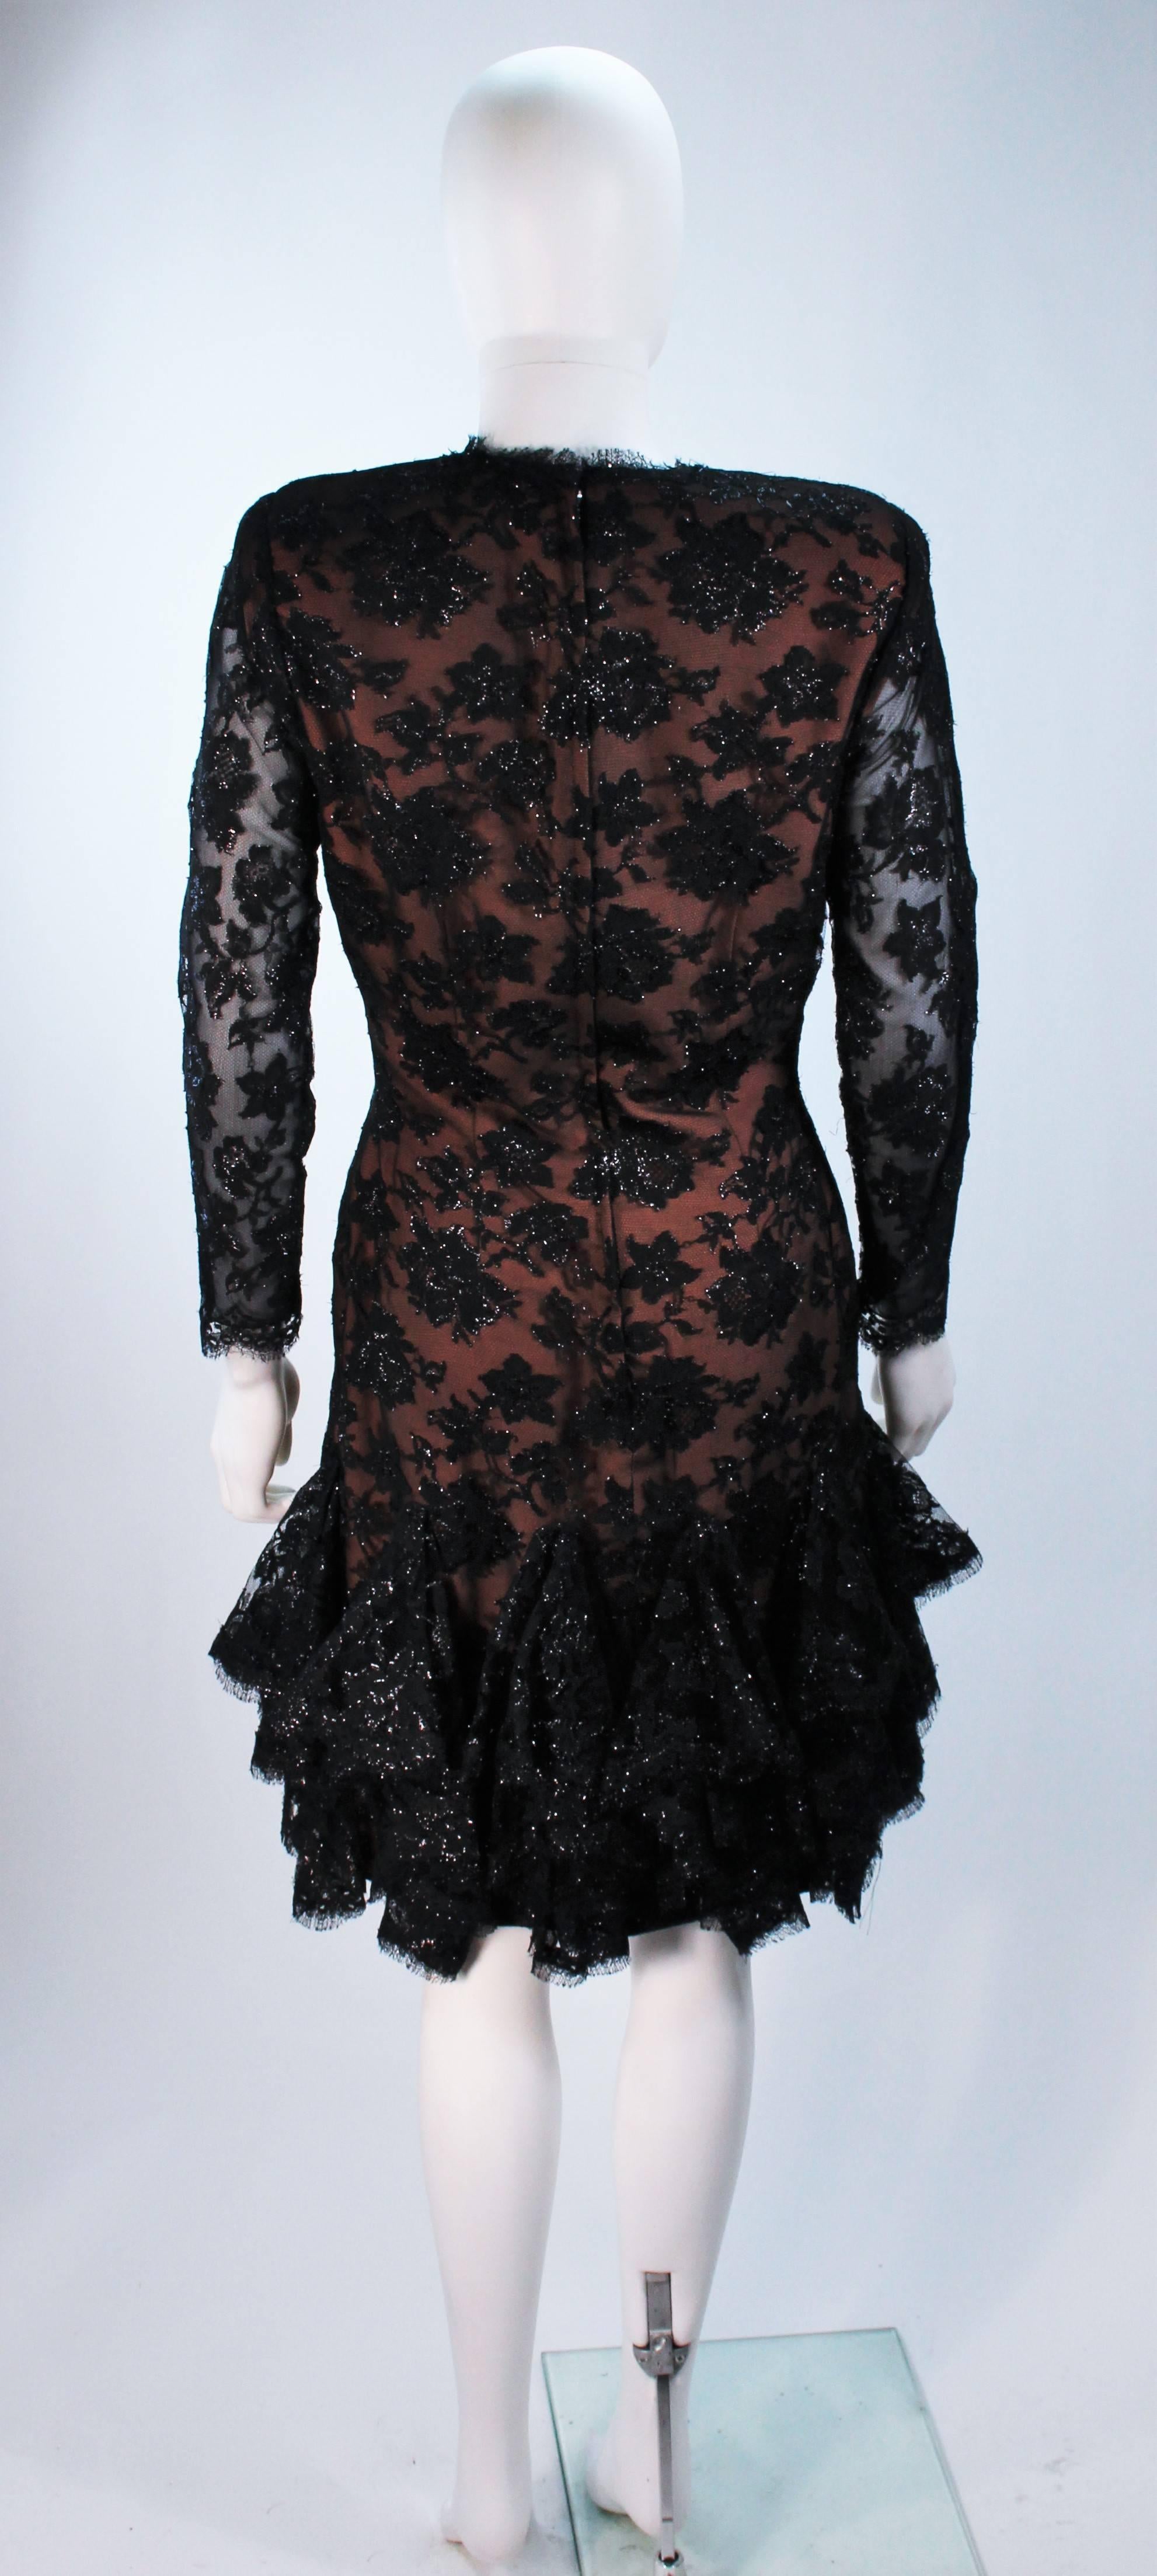 TRAVILLA Black on Black Lace Lame Cocktail Dress with Ruffle Hem Size 8 For Sale 5